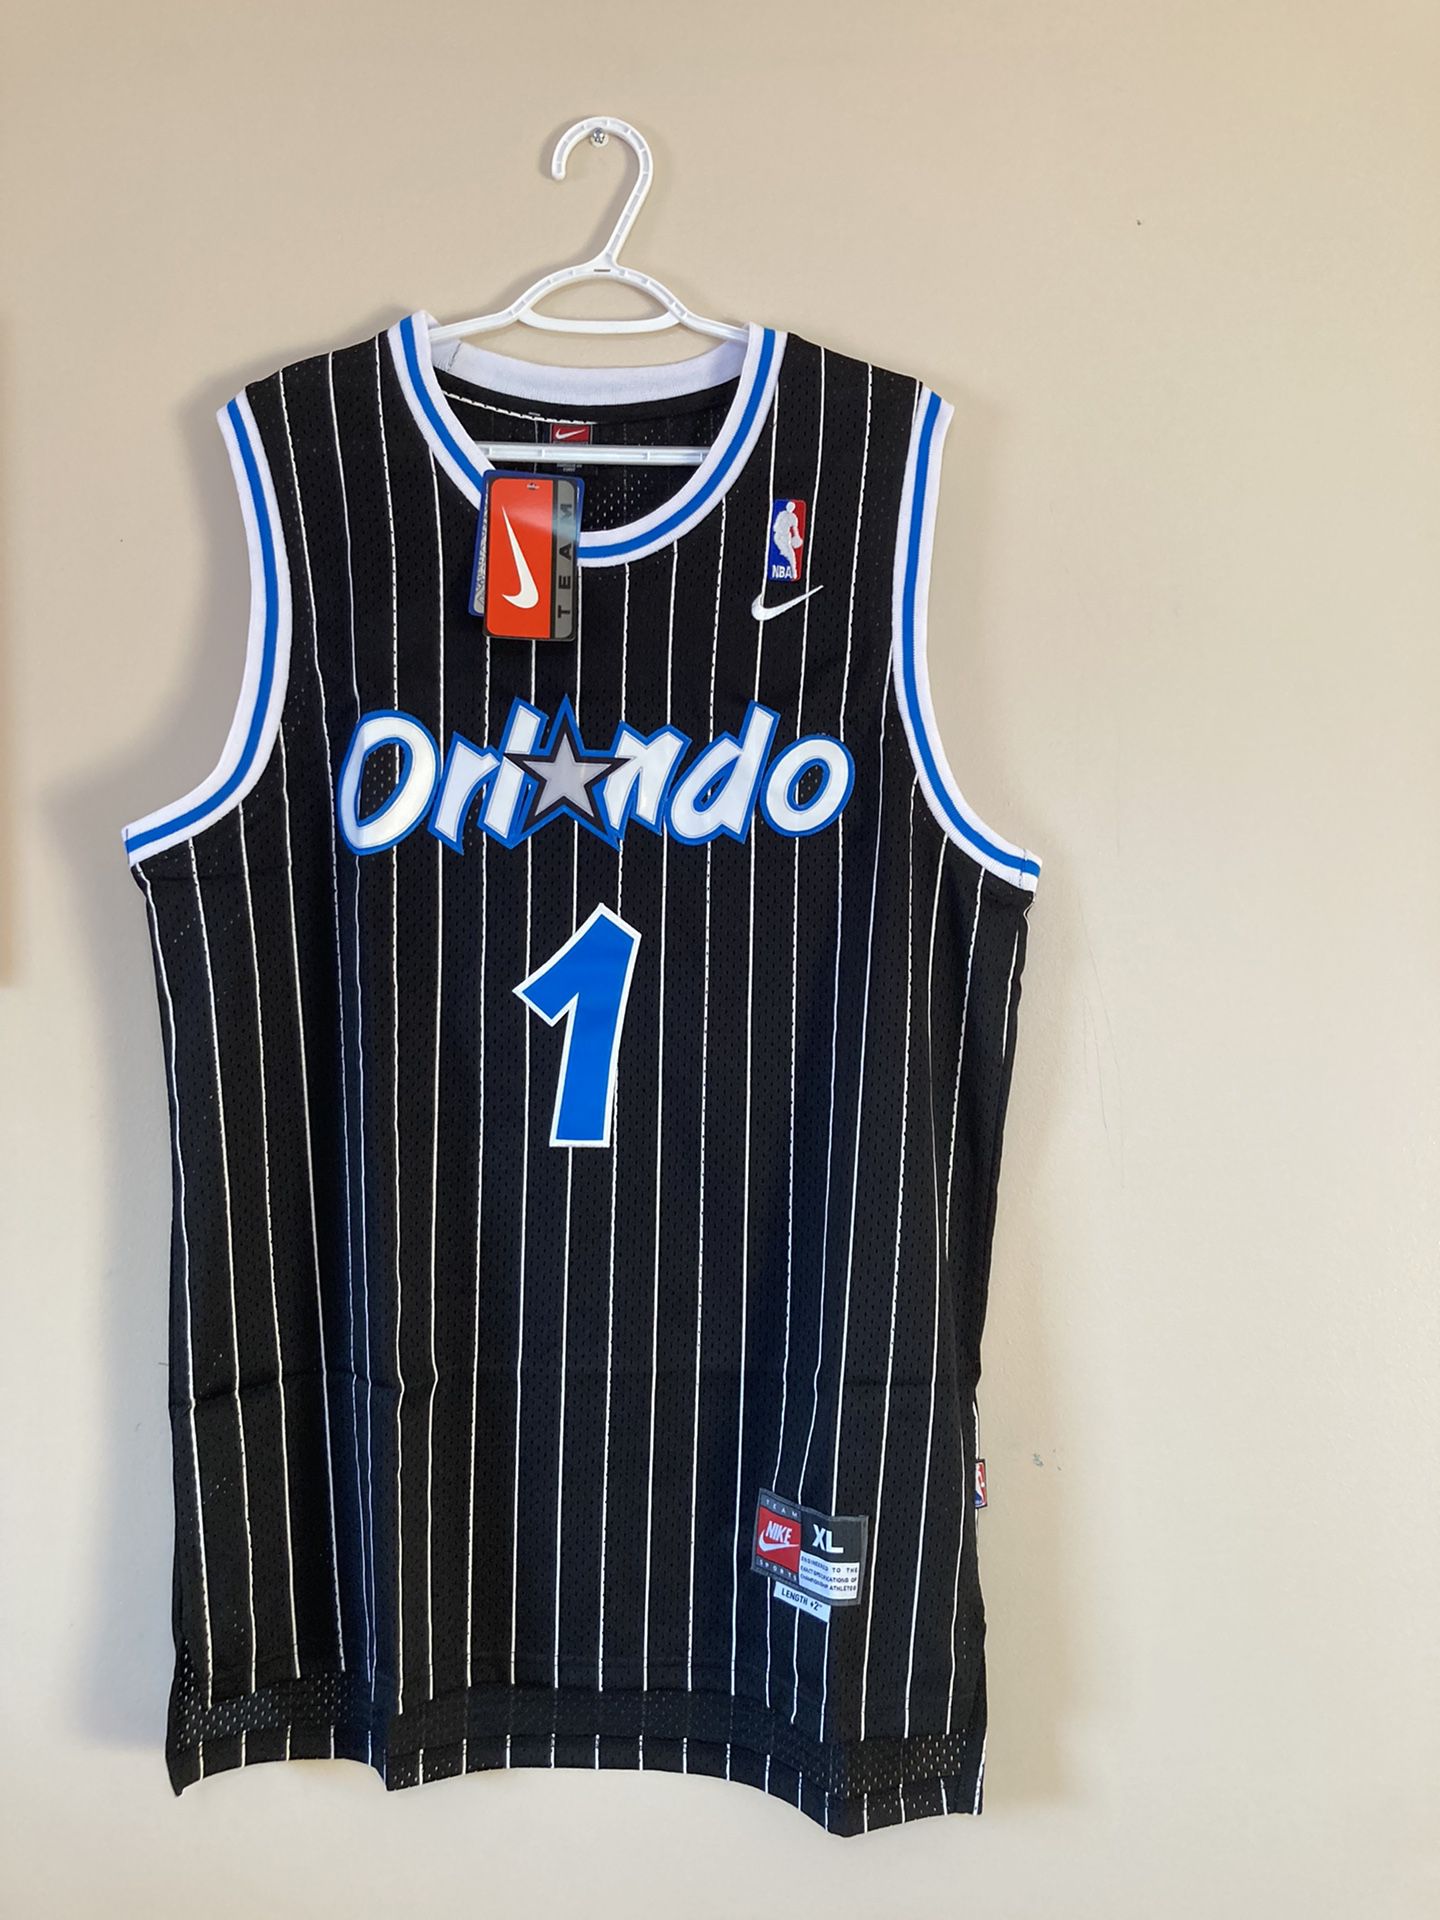 Authentic Penny Hardaway Jersey for Sale in North Chicago, IL - OfferUp